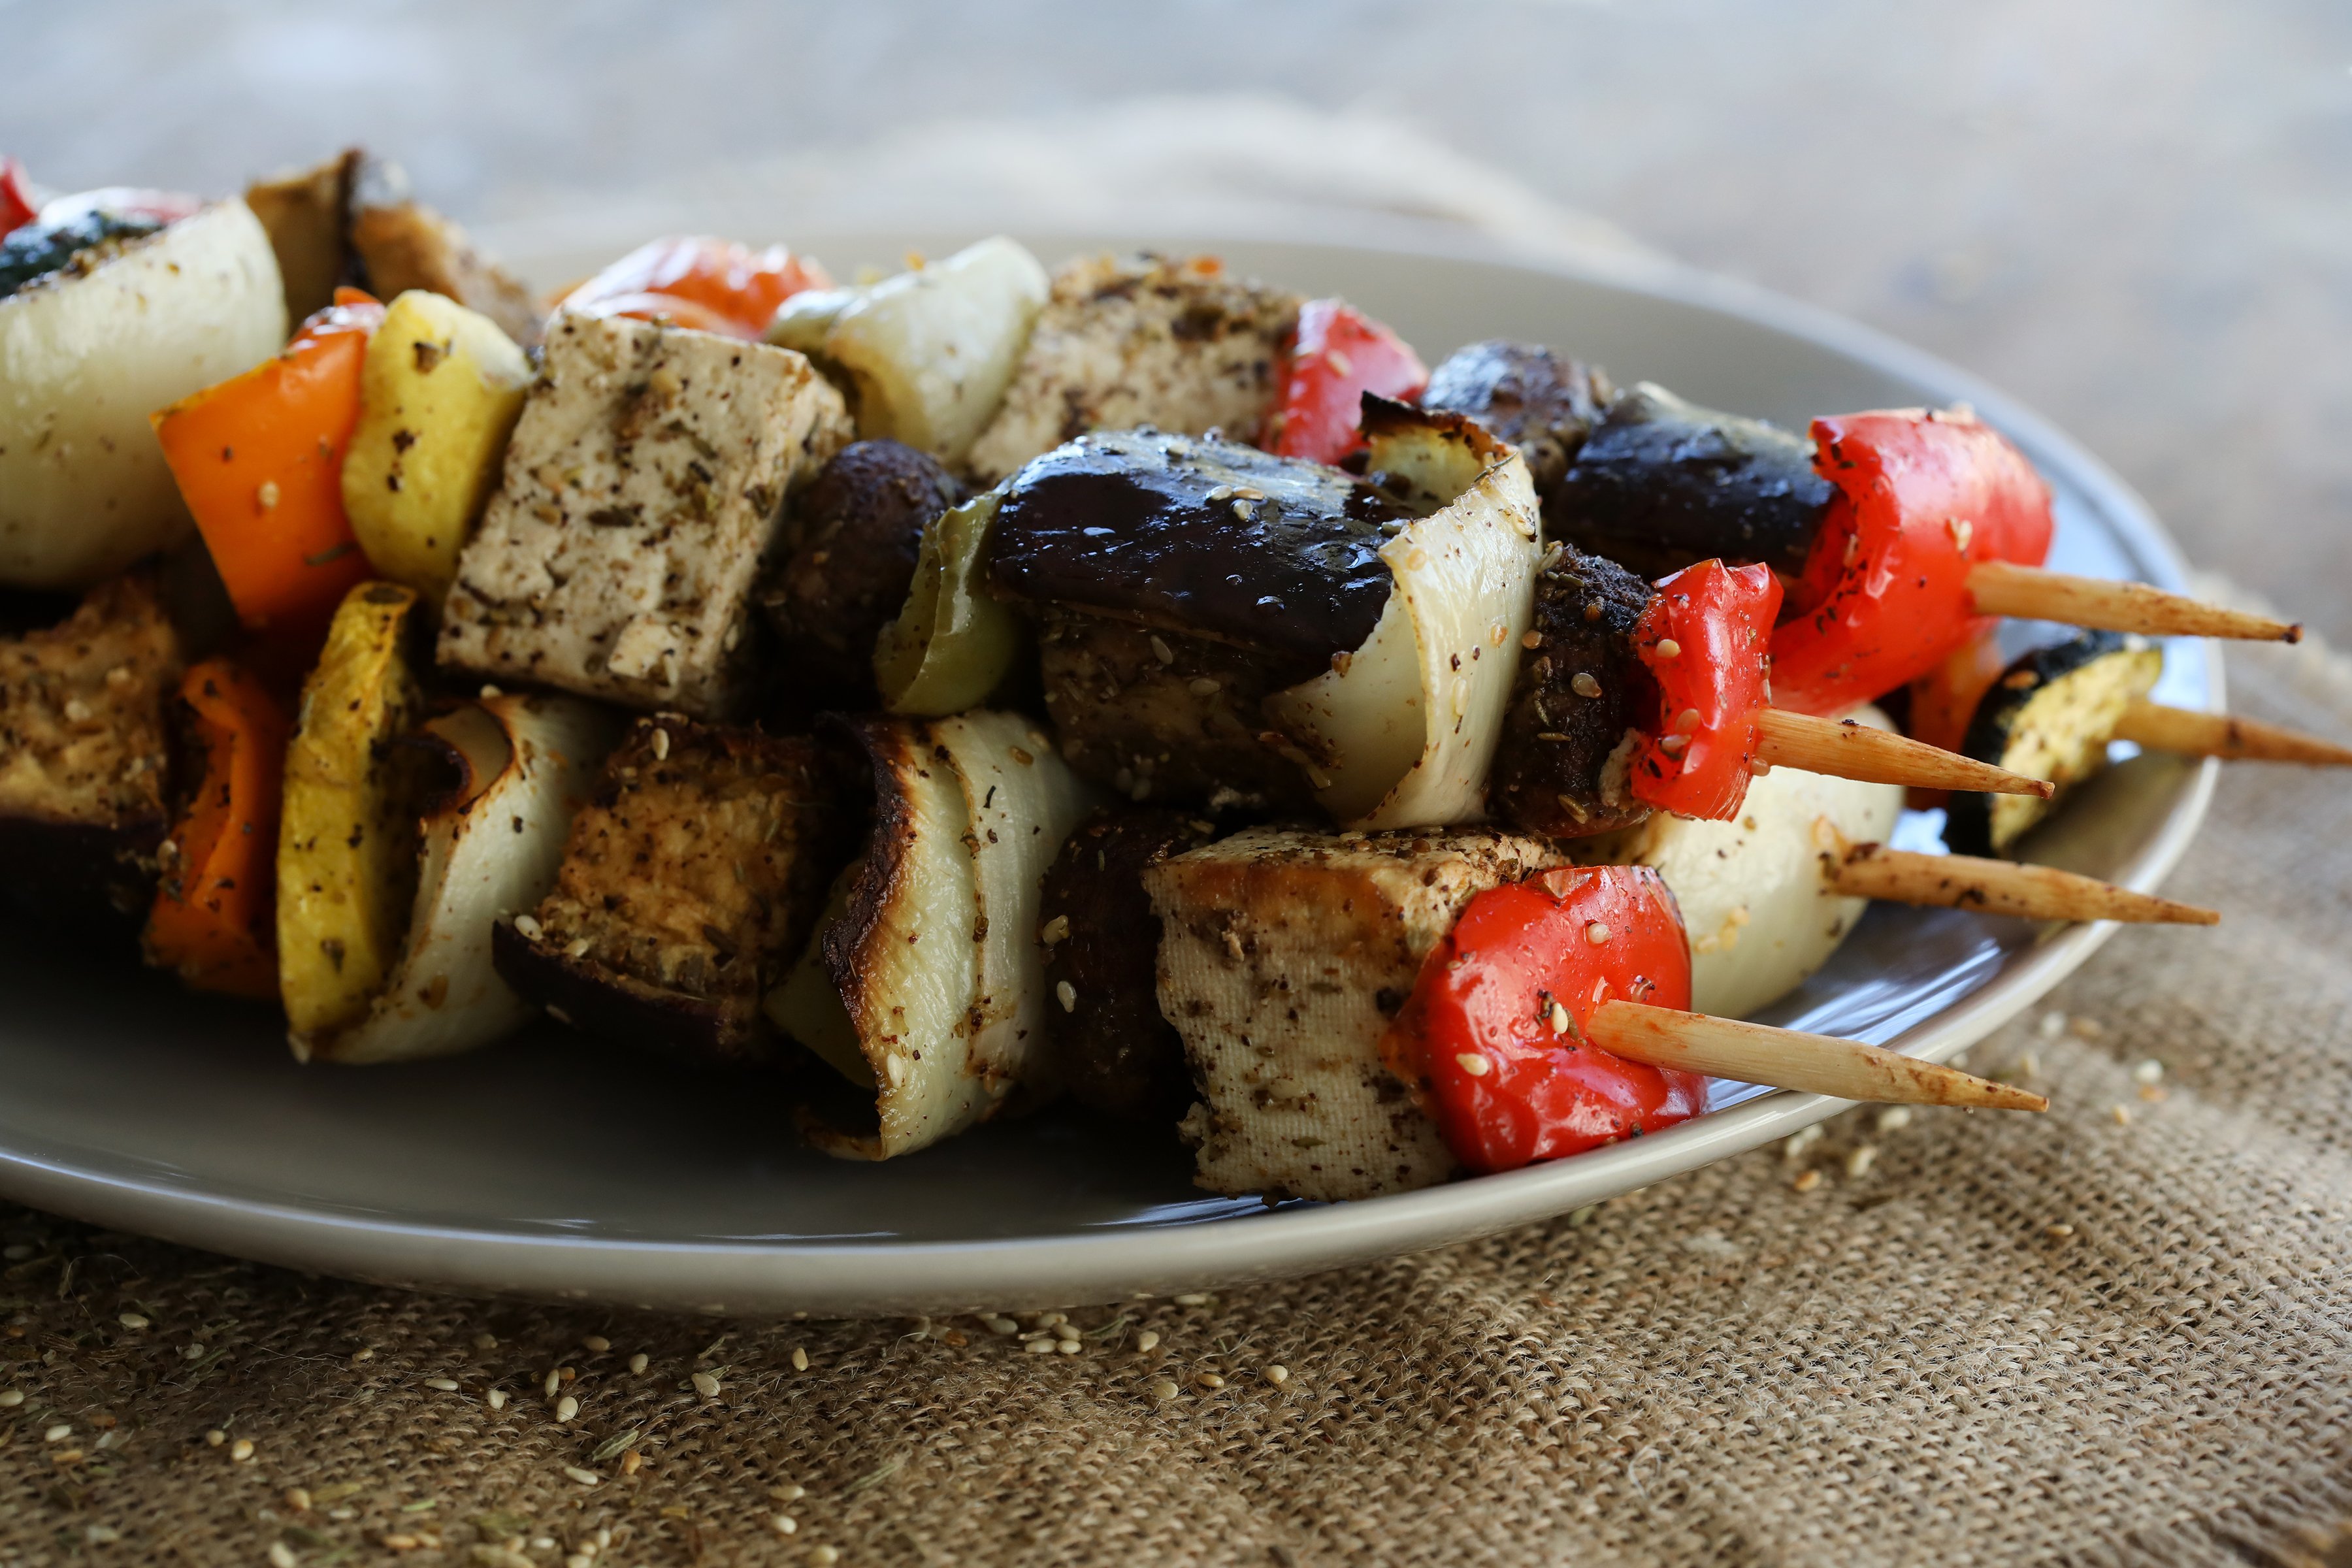 Grilled vegetable kebabs with peppers, zucchini, eggplant, and onion, resting on a plate